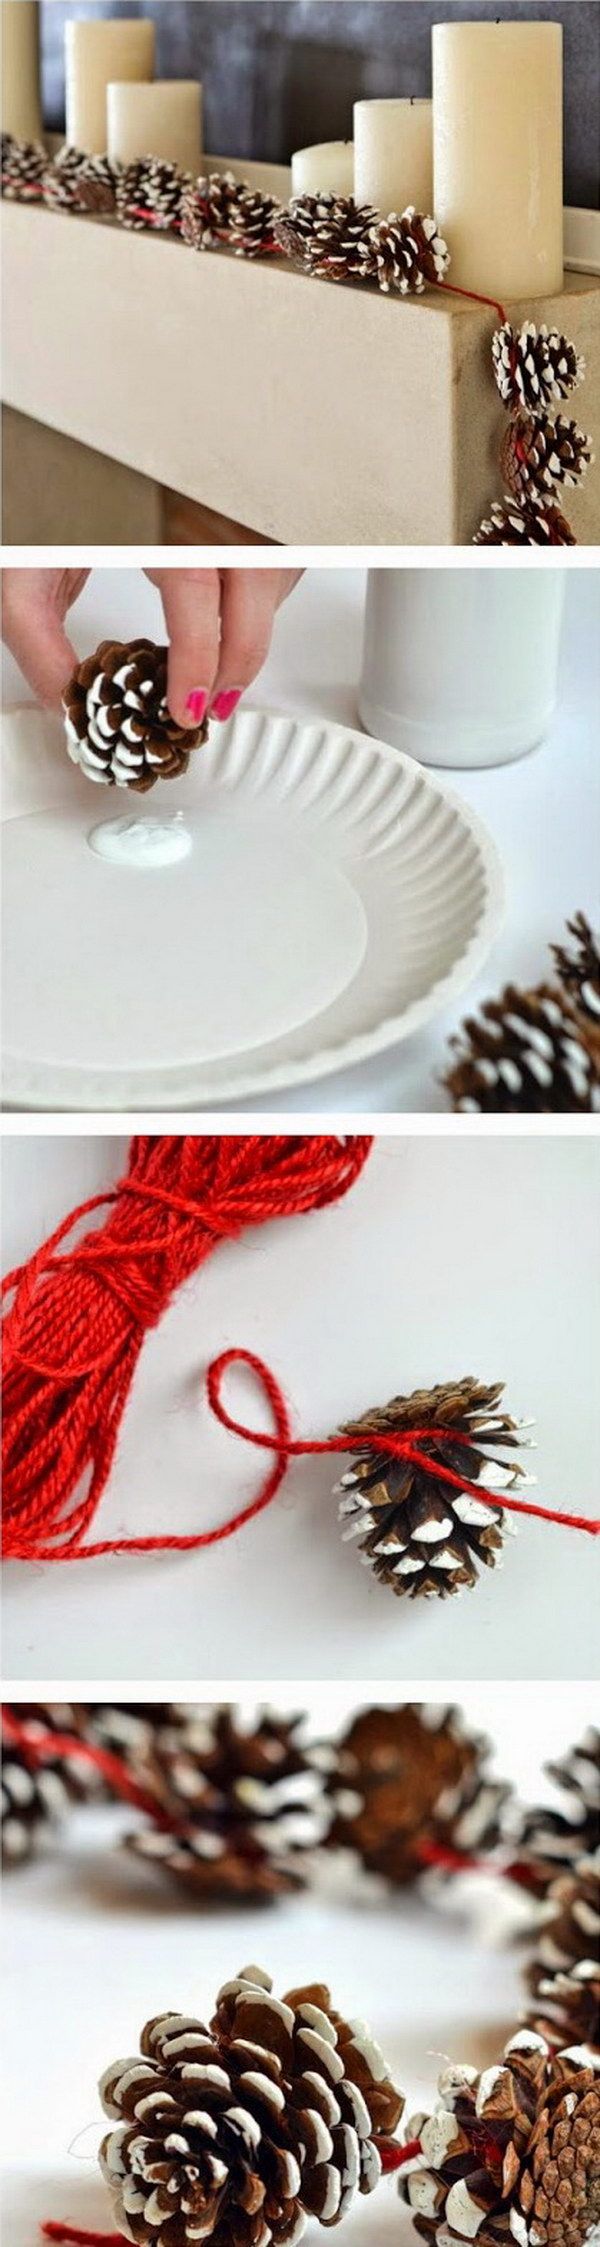 Pine Cone Garlands for Christmas Decoration. Love its rustic look for decoration at home. Super easy crafts that can get your kids